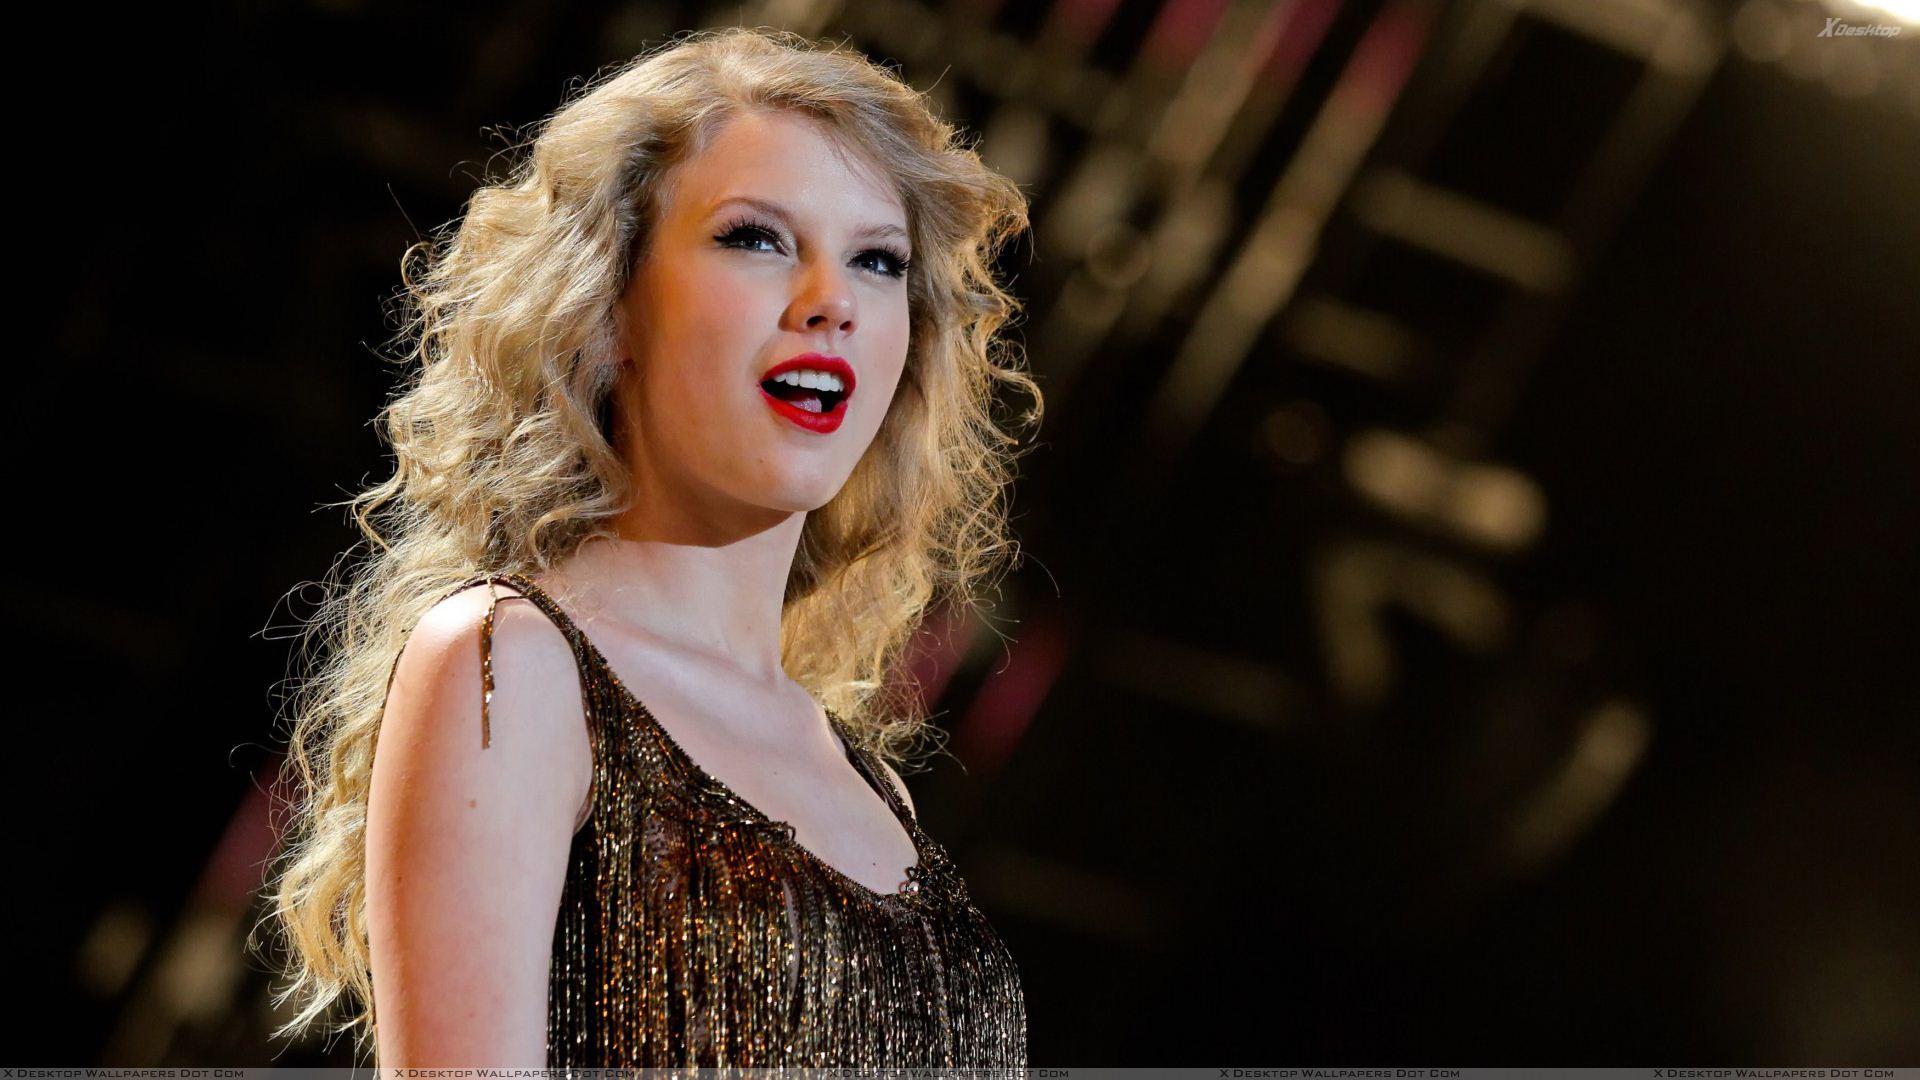 Taylor Swift Red Lips N Open Mouth Photohoot At Stage Wallpaper